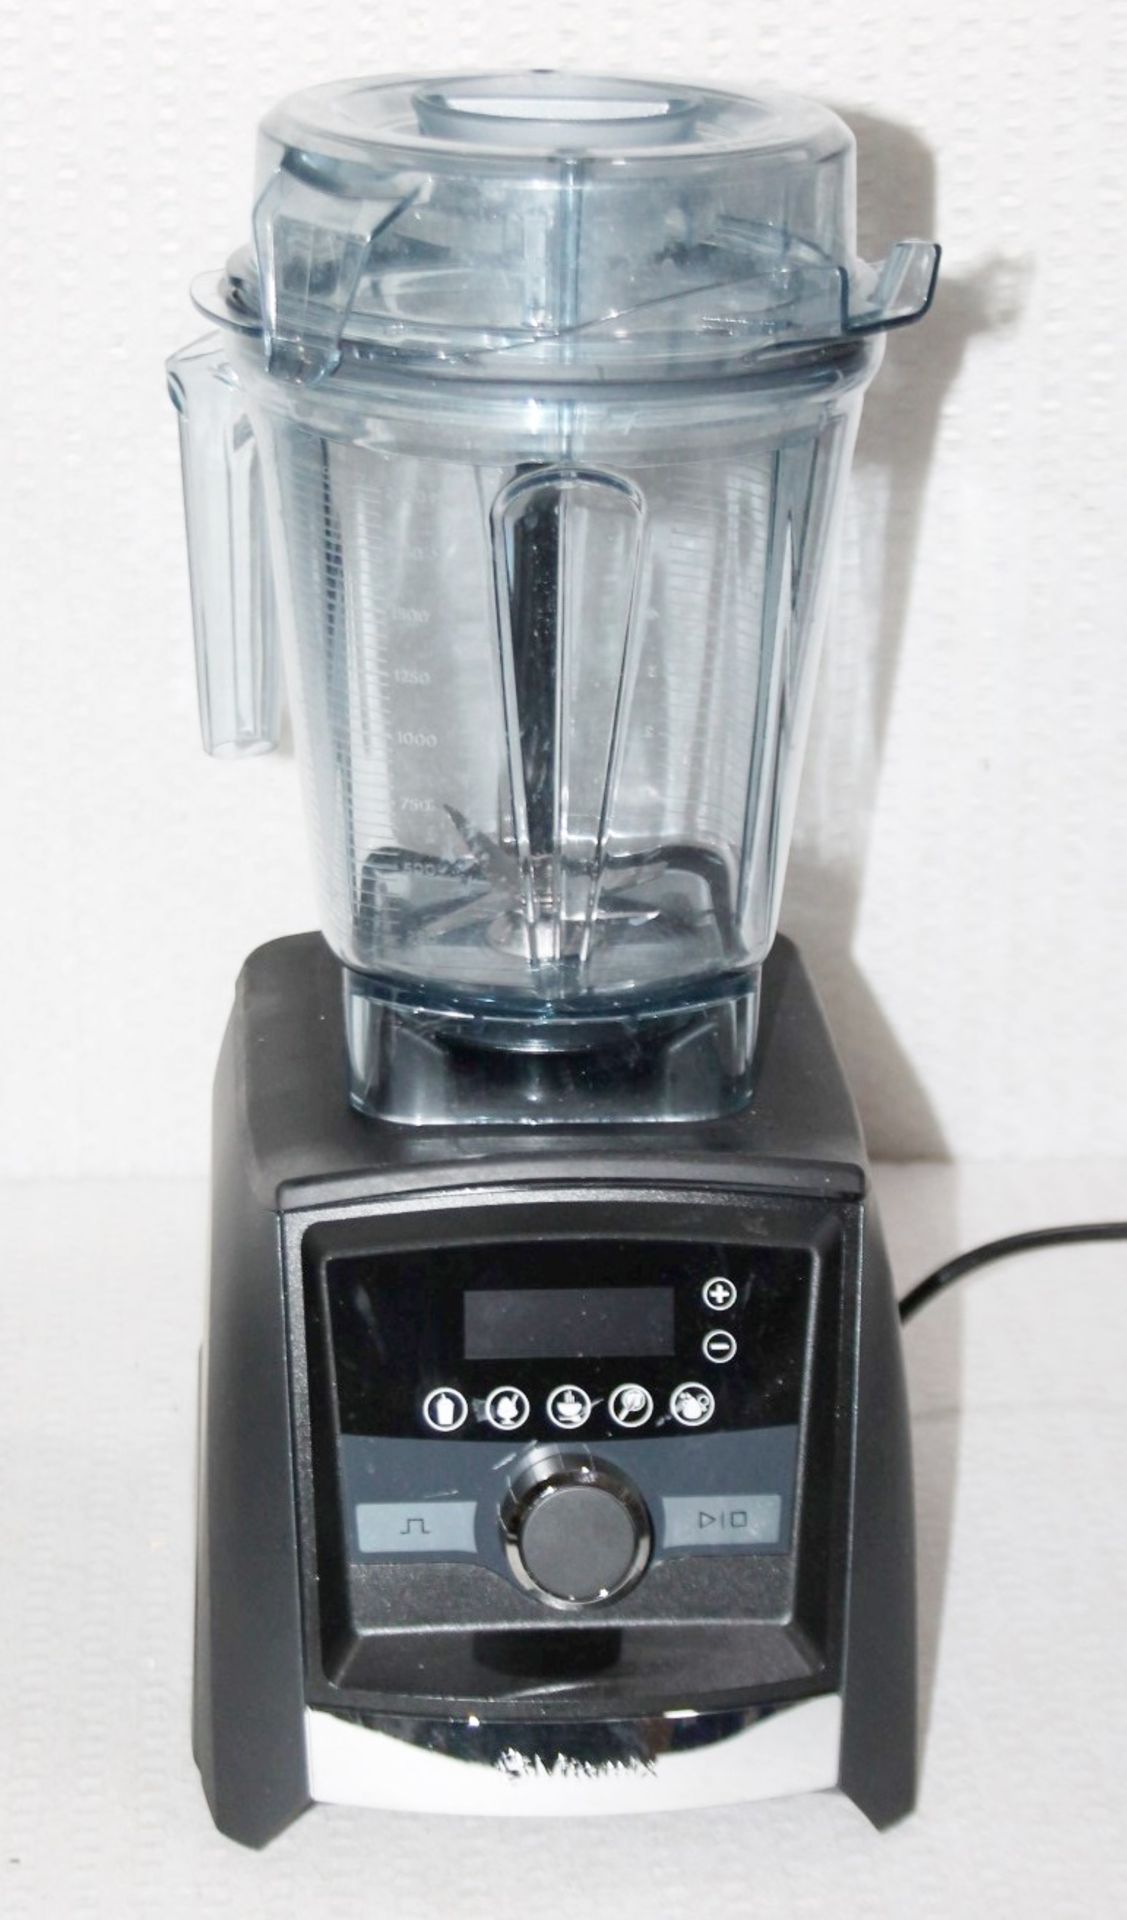 1 x VITAMIX Ascent A3500 Blender Anniversary Bundle With Accessories - Original Price £799.00 - Ref: - Image 2 of 7